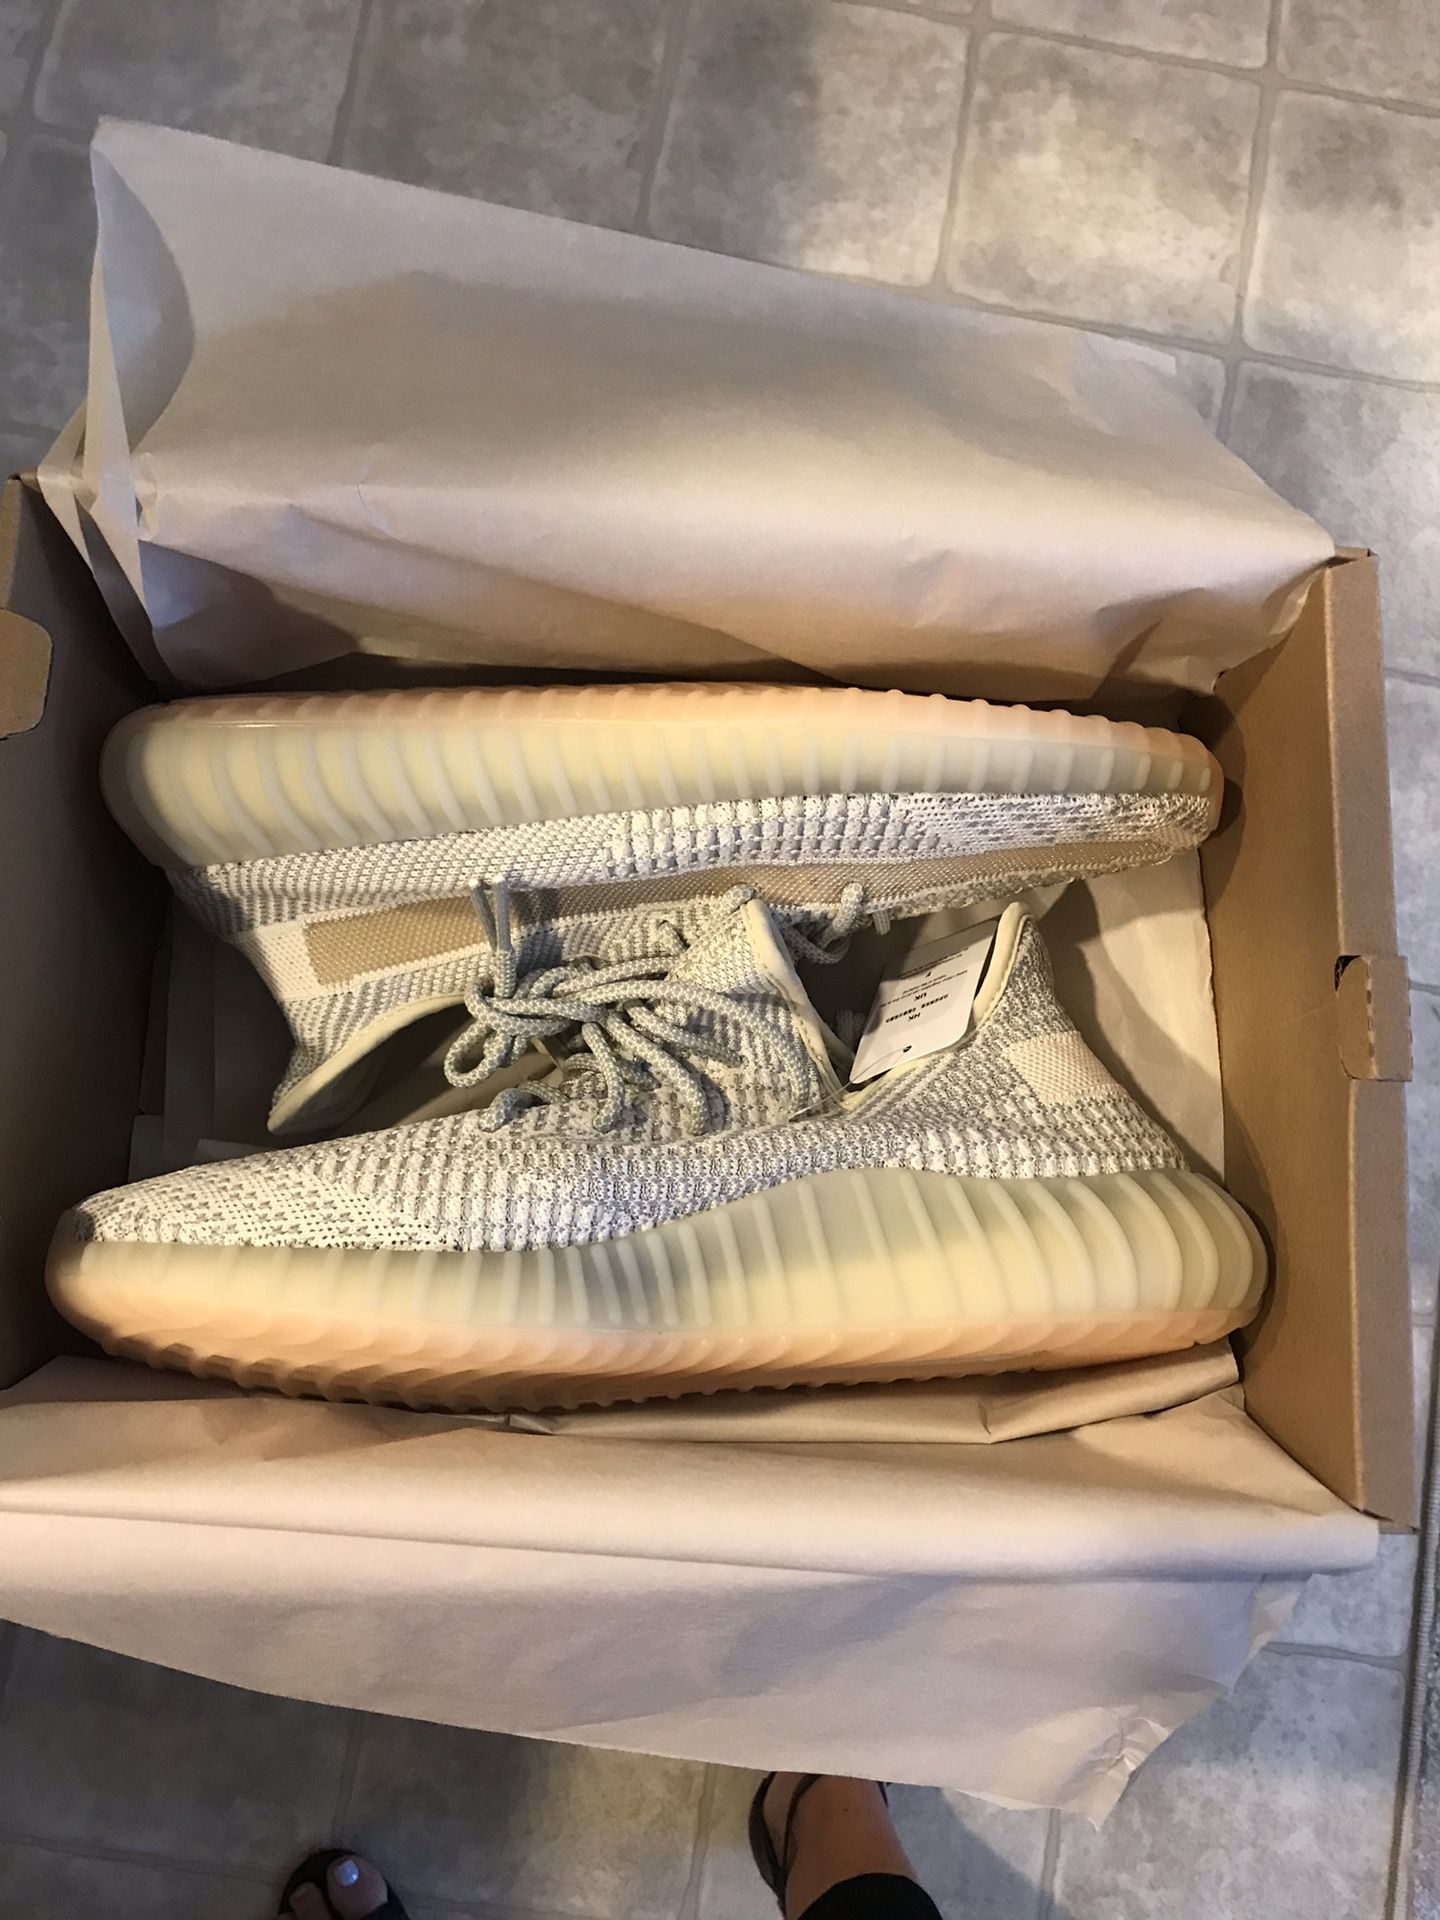 Adidas Yeezy 350V2 Lundmark Size 11 New in the box. Fits smaller may want to size up